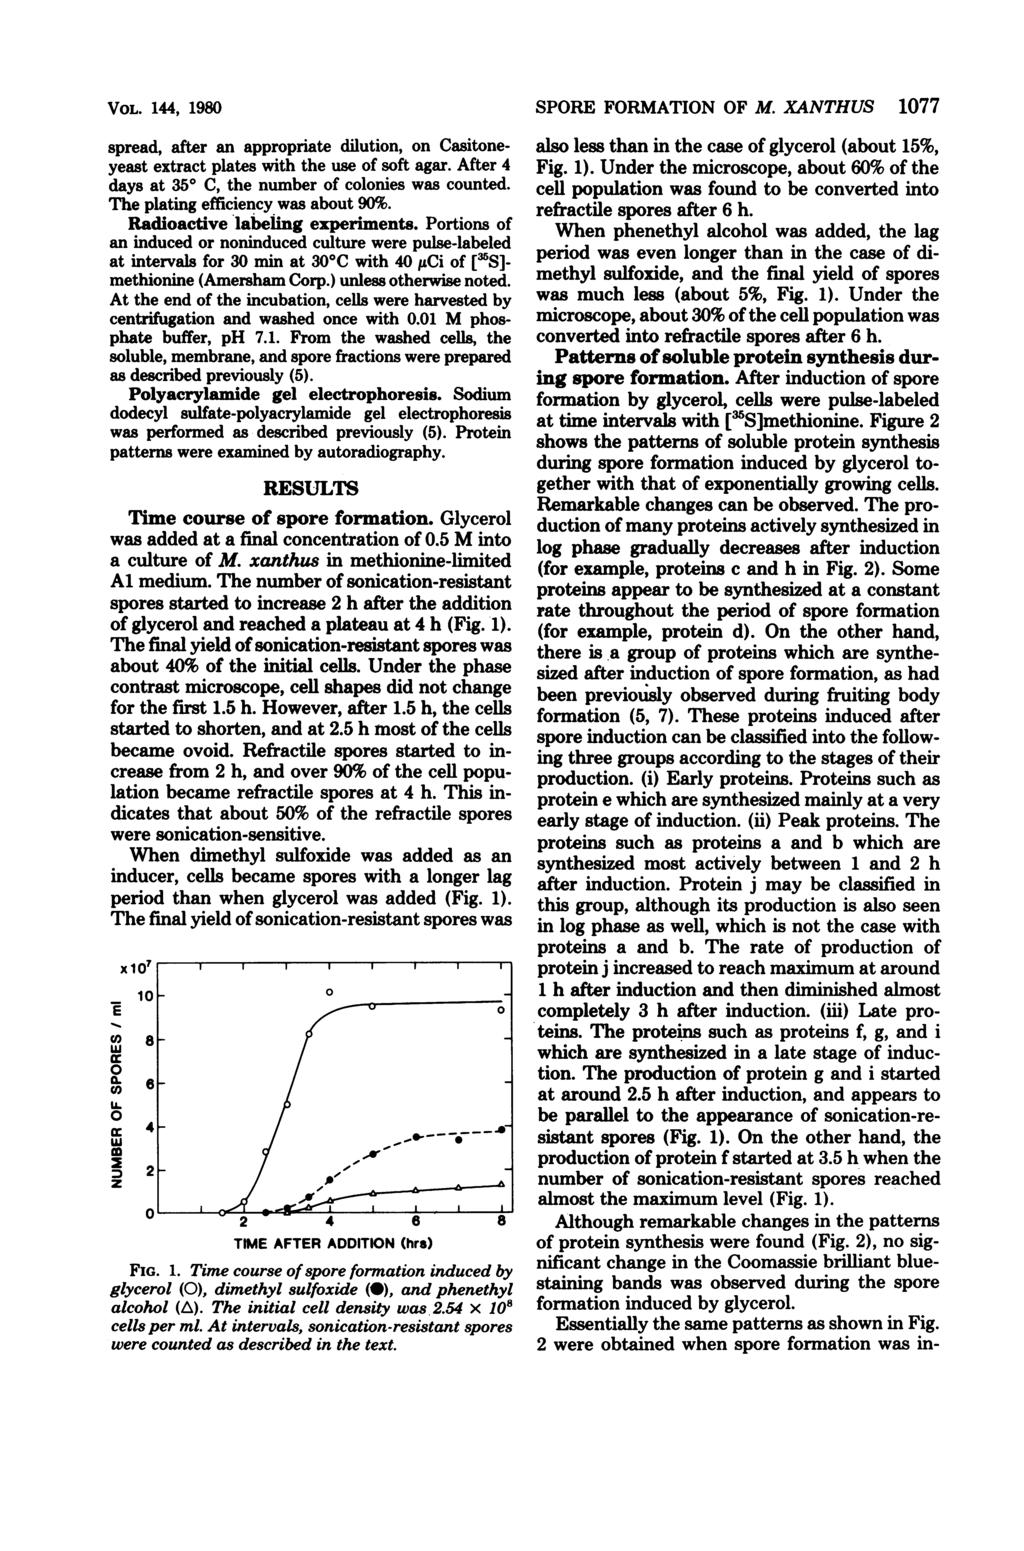 VOL. 144, 1980 spread, after an appropriate dilution, on Casitoneyeast extract plates with the use of soft agar. After 4 days at 350 C, the number of colonies was counted.